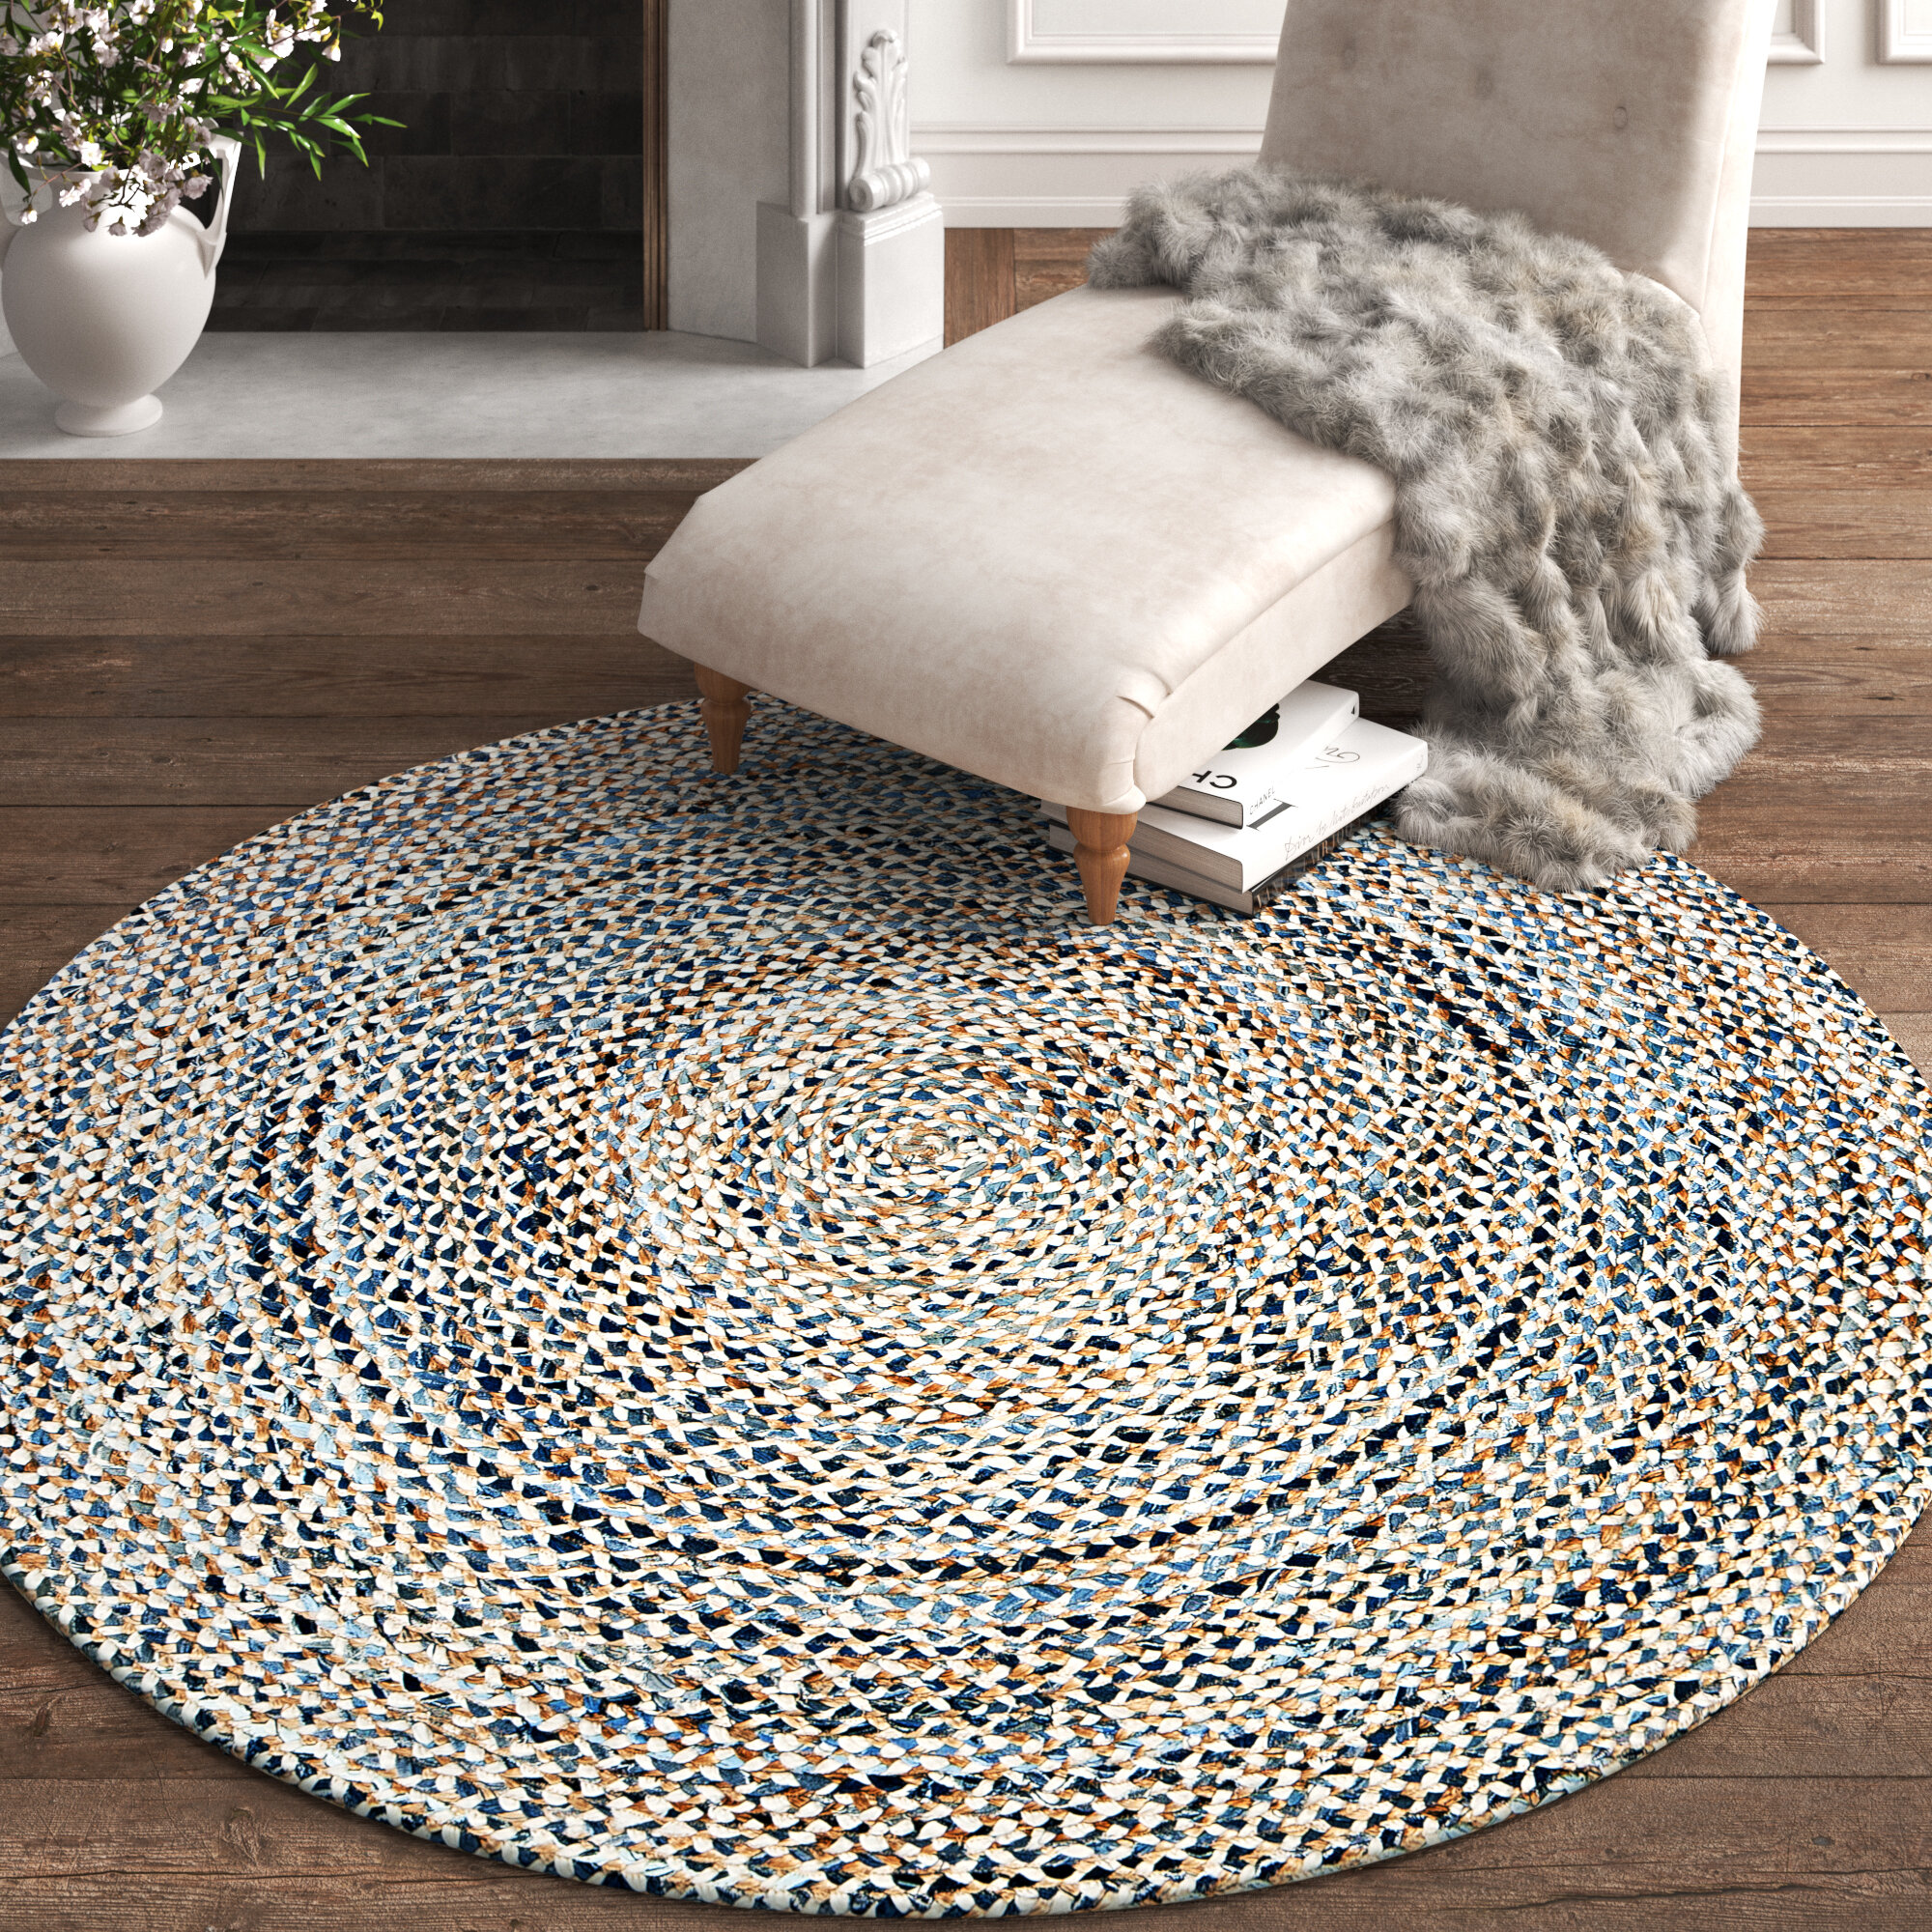 Round Braided Area Rug Cotton Hardwood Floors Natural Recycled Rug 